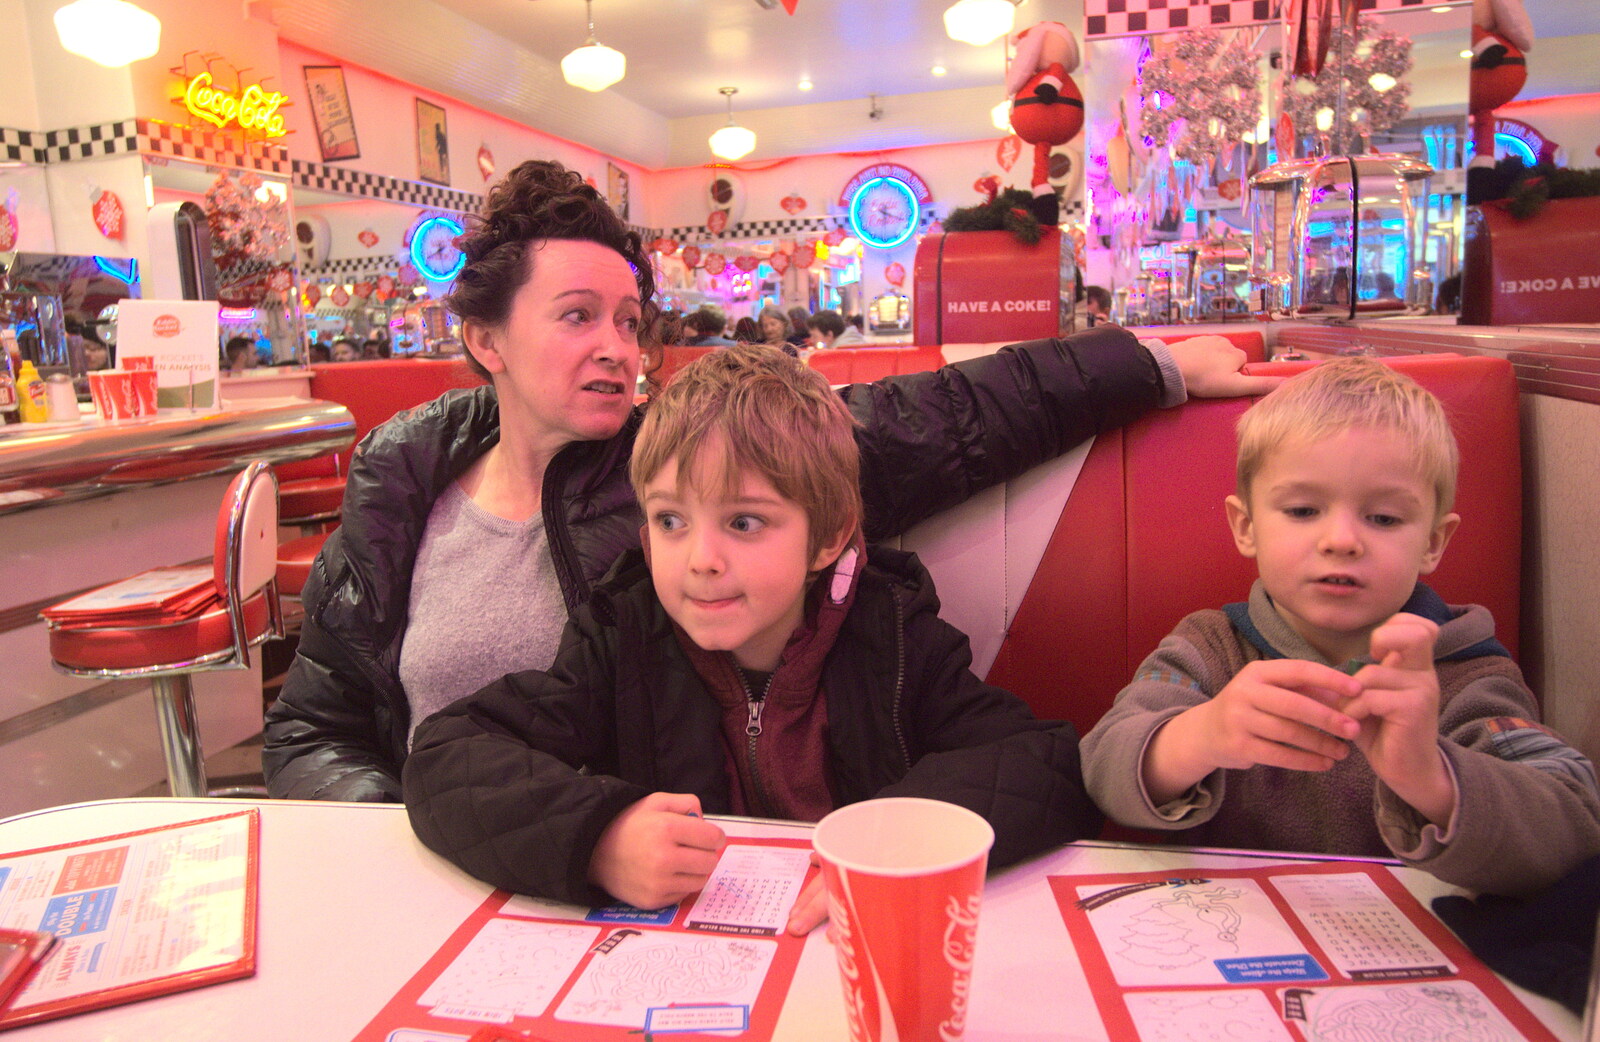 Evelyn, Fred and Harry in Eddie Rocket's burger bar from Christmas Eve in Dublin and Blackrock, Ireland - 24th December 2015